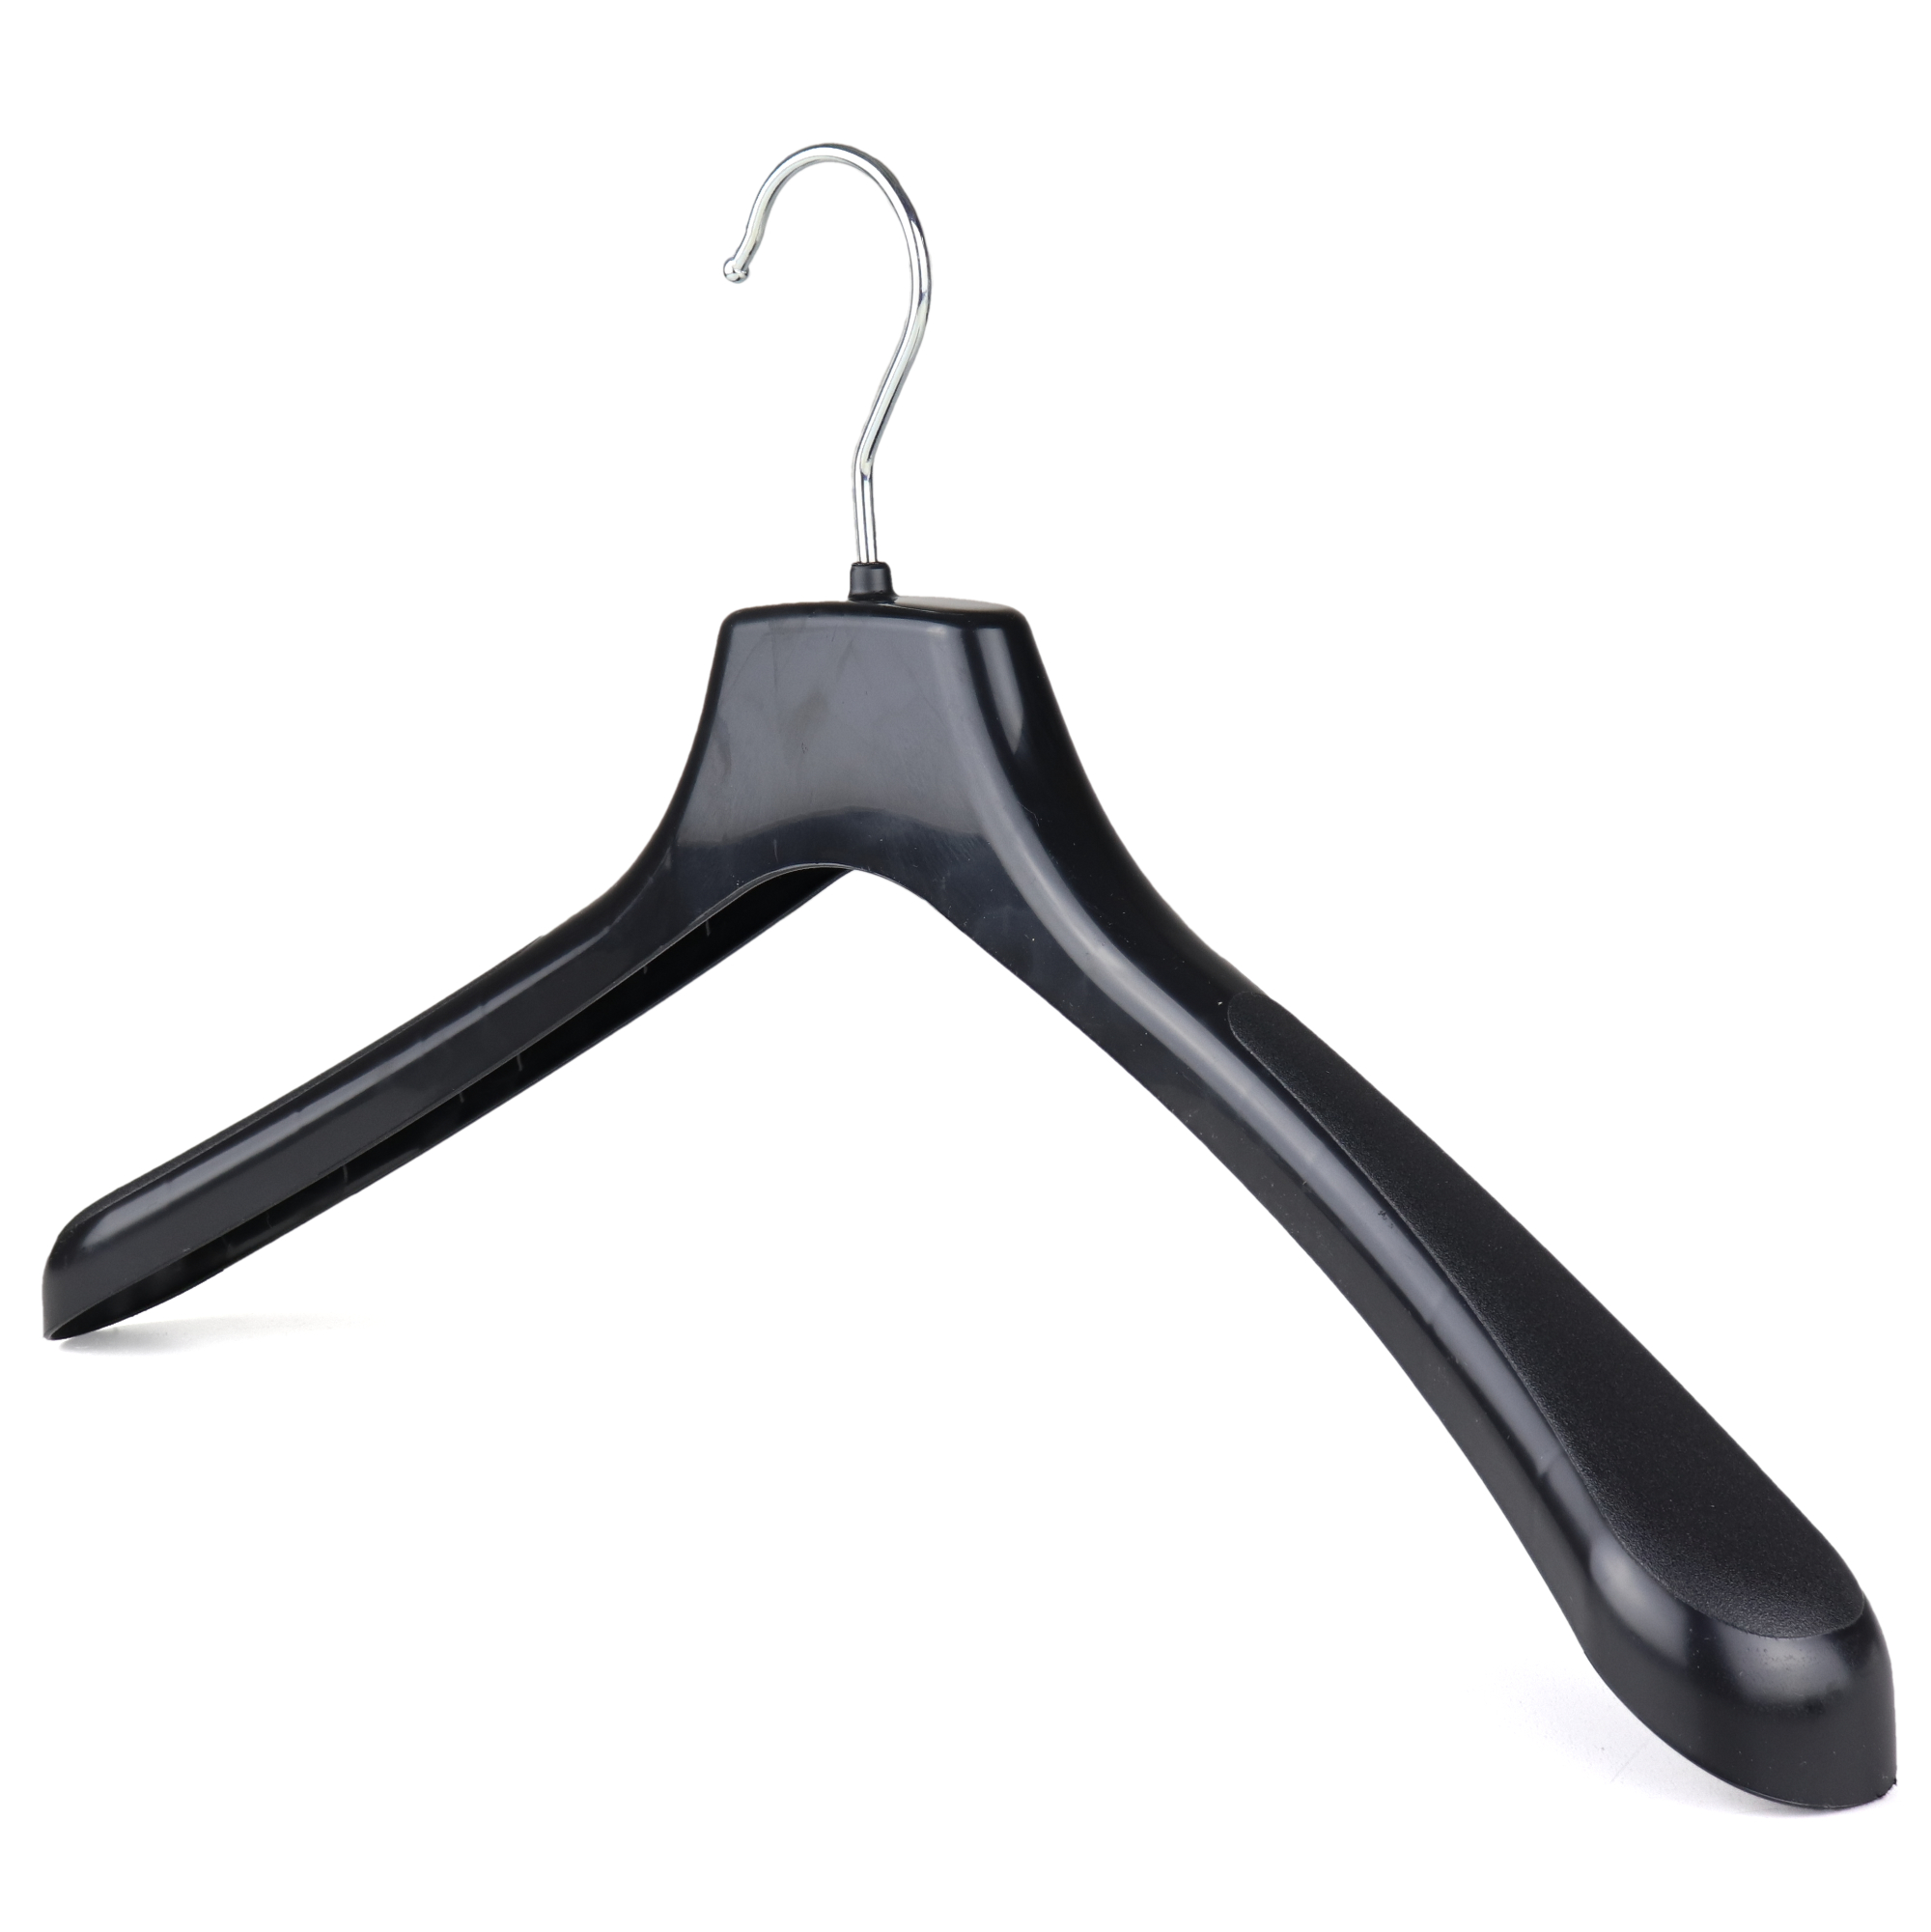 20 Plastic Black Coated Clothes Hangers For T-Shirts Jackets Tops Garments UK 